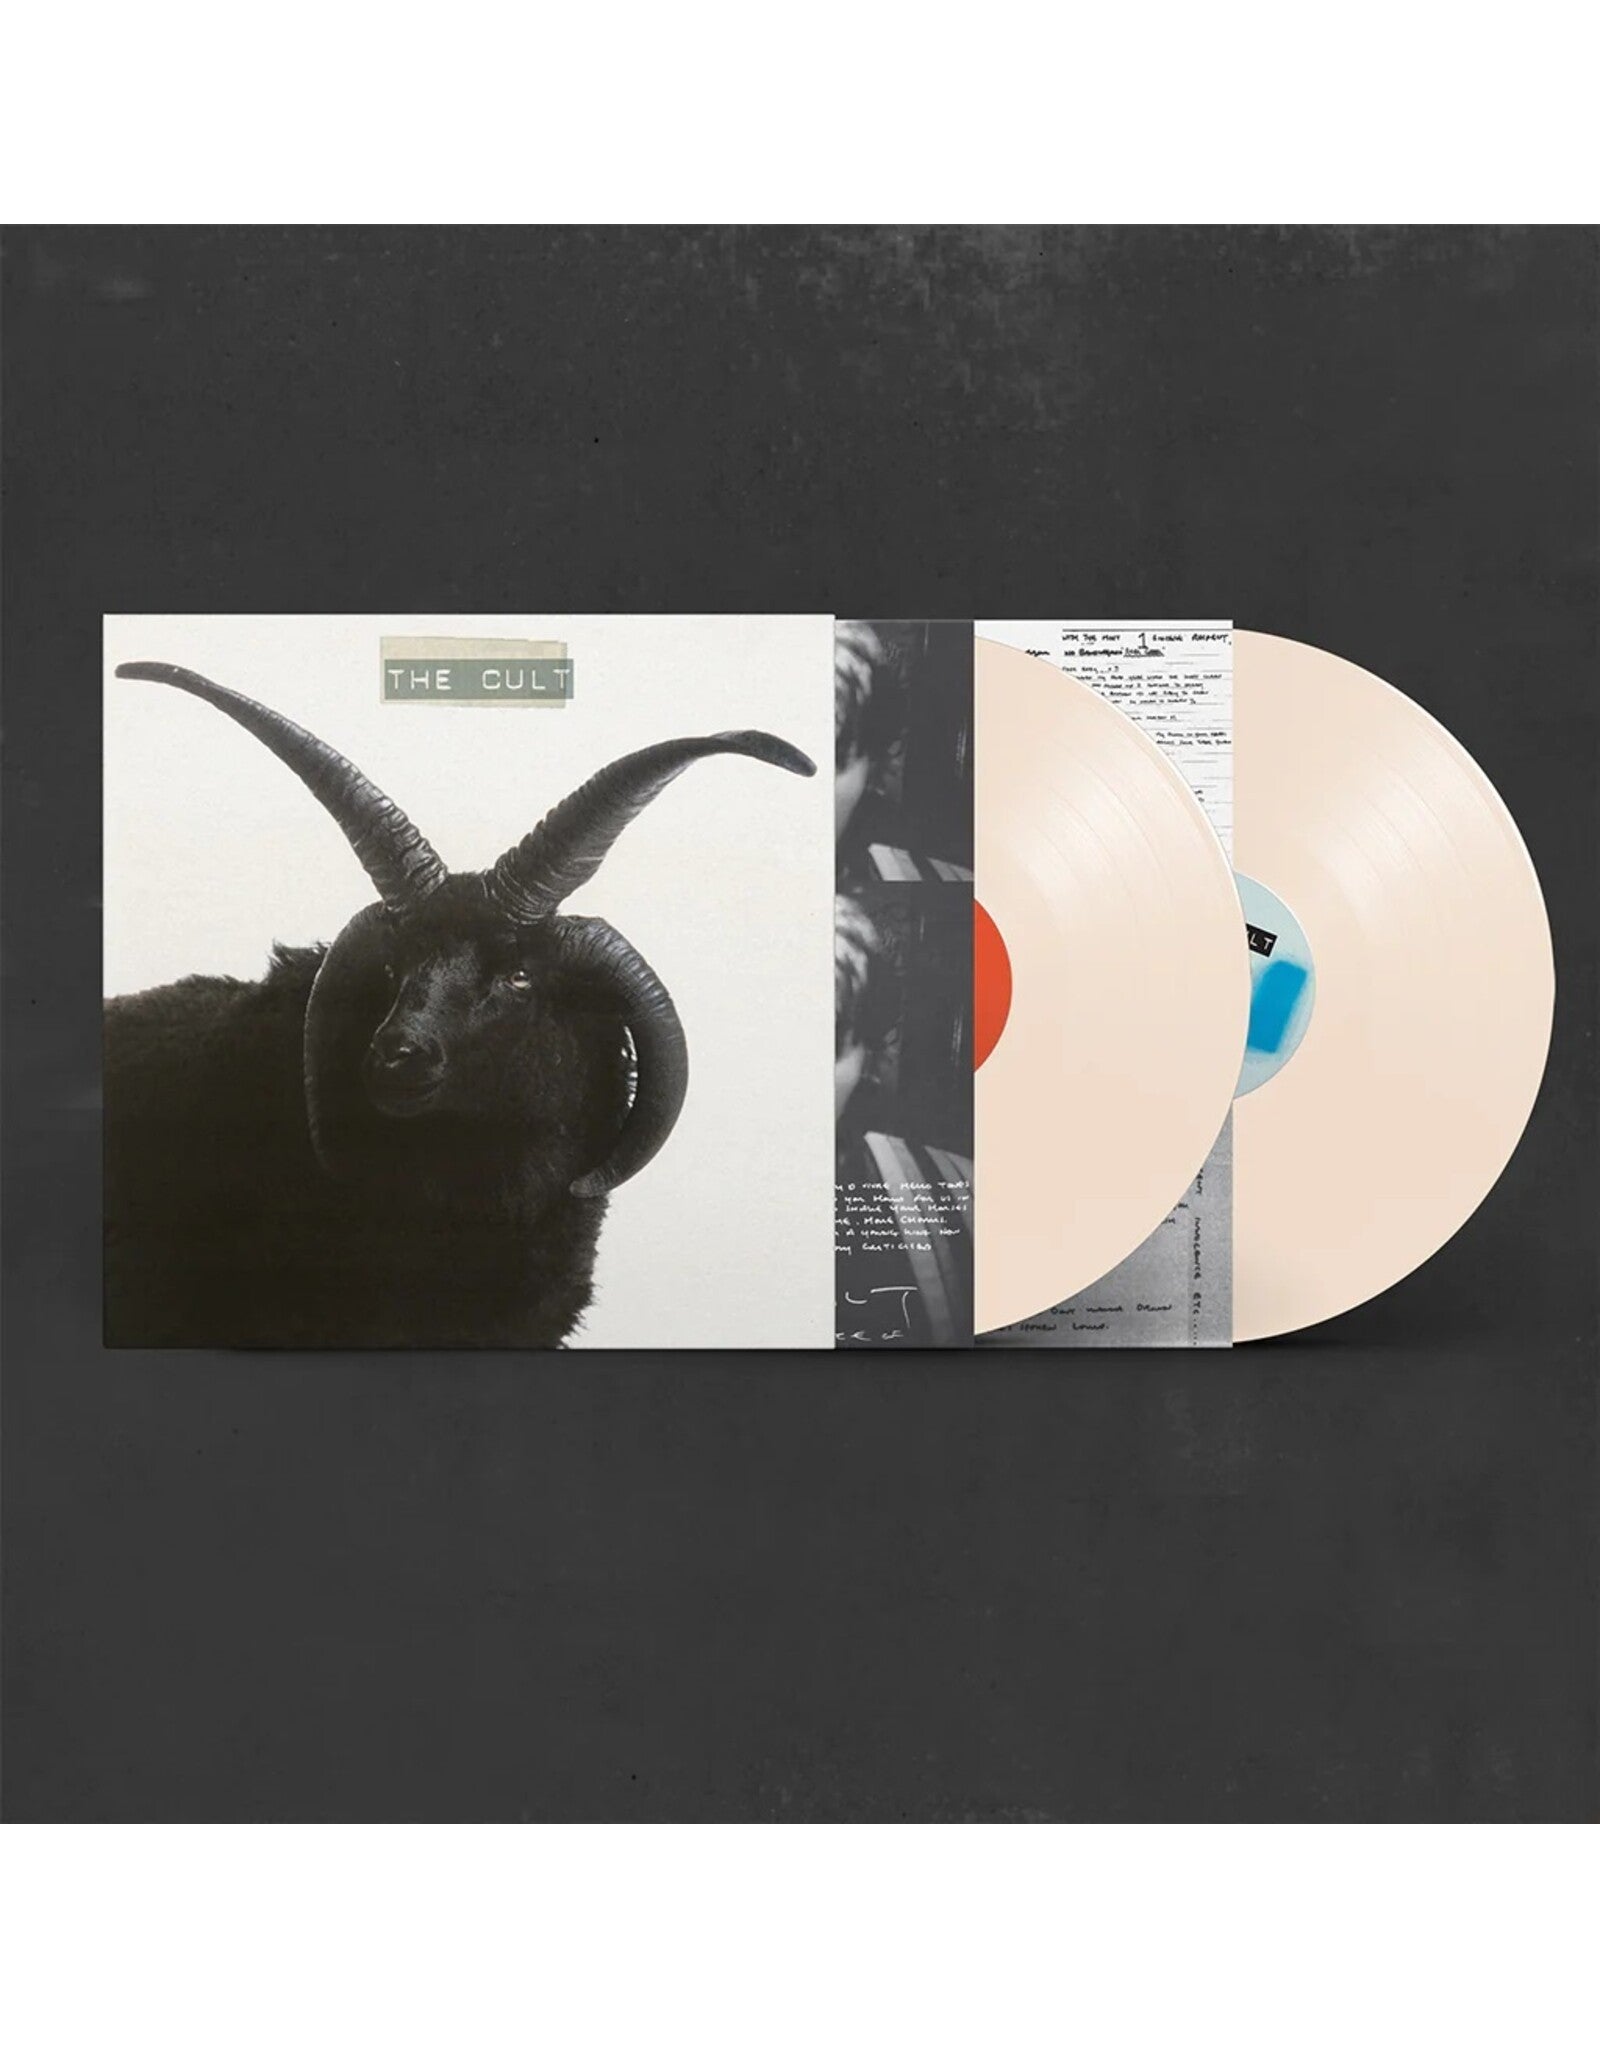 The Cult | The Cult (Indie Exclusive, Colored Vinyl, White) | Vinyl